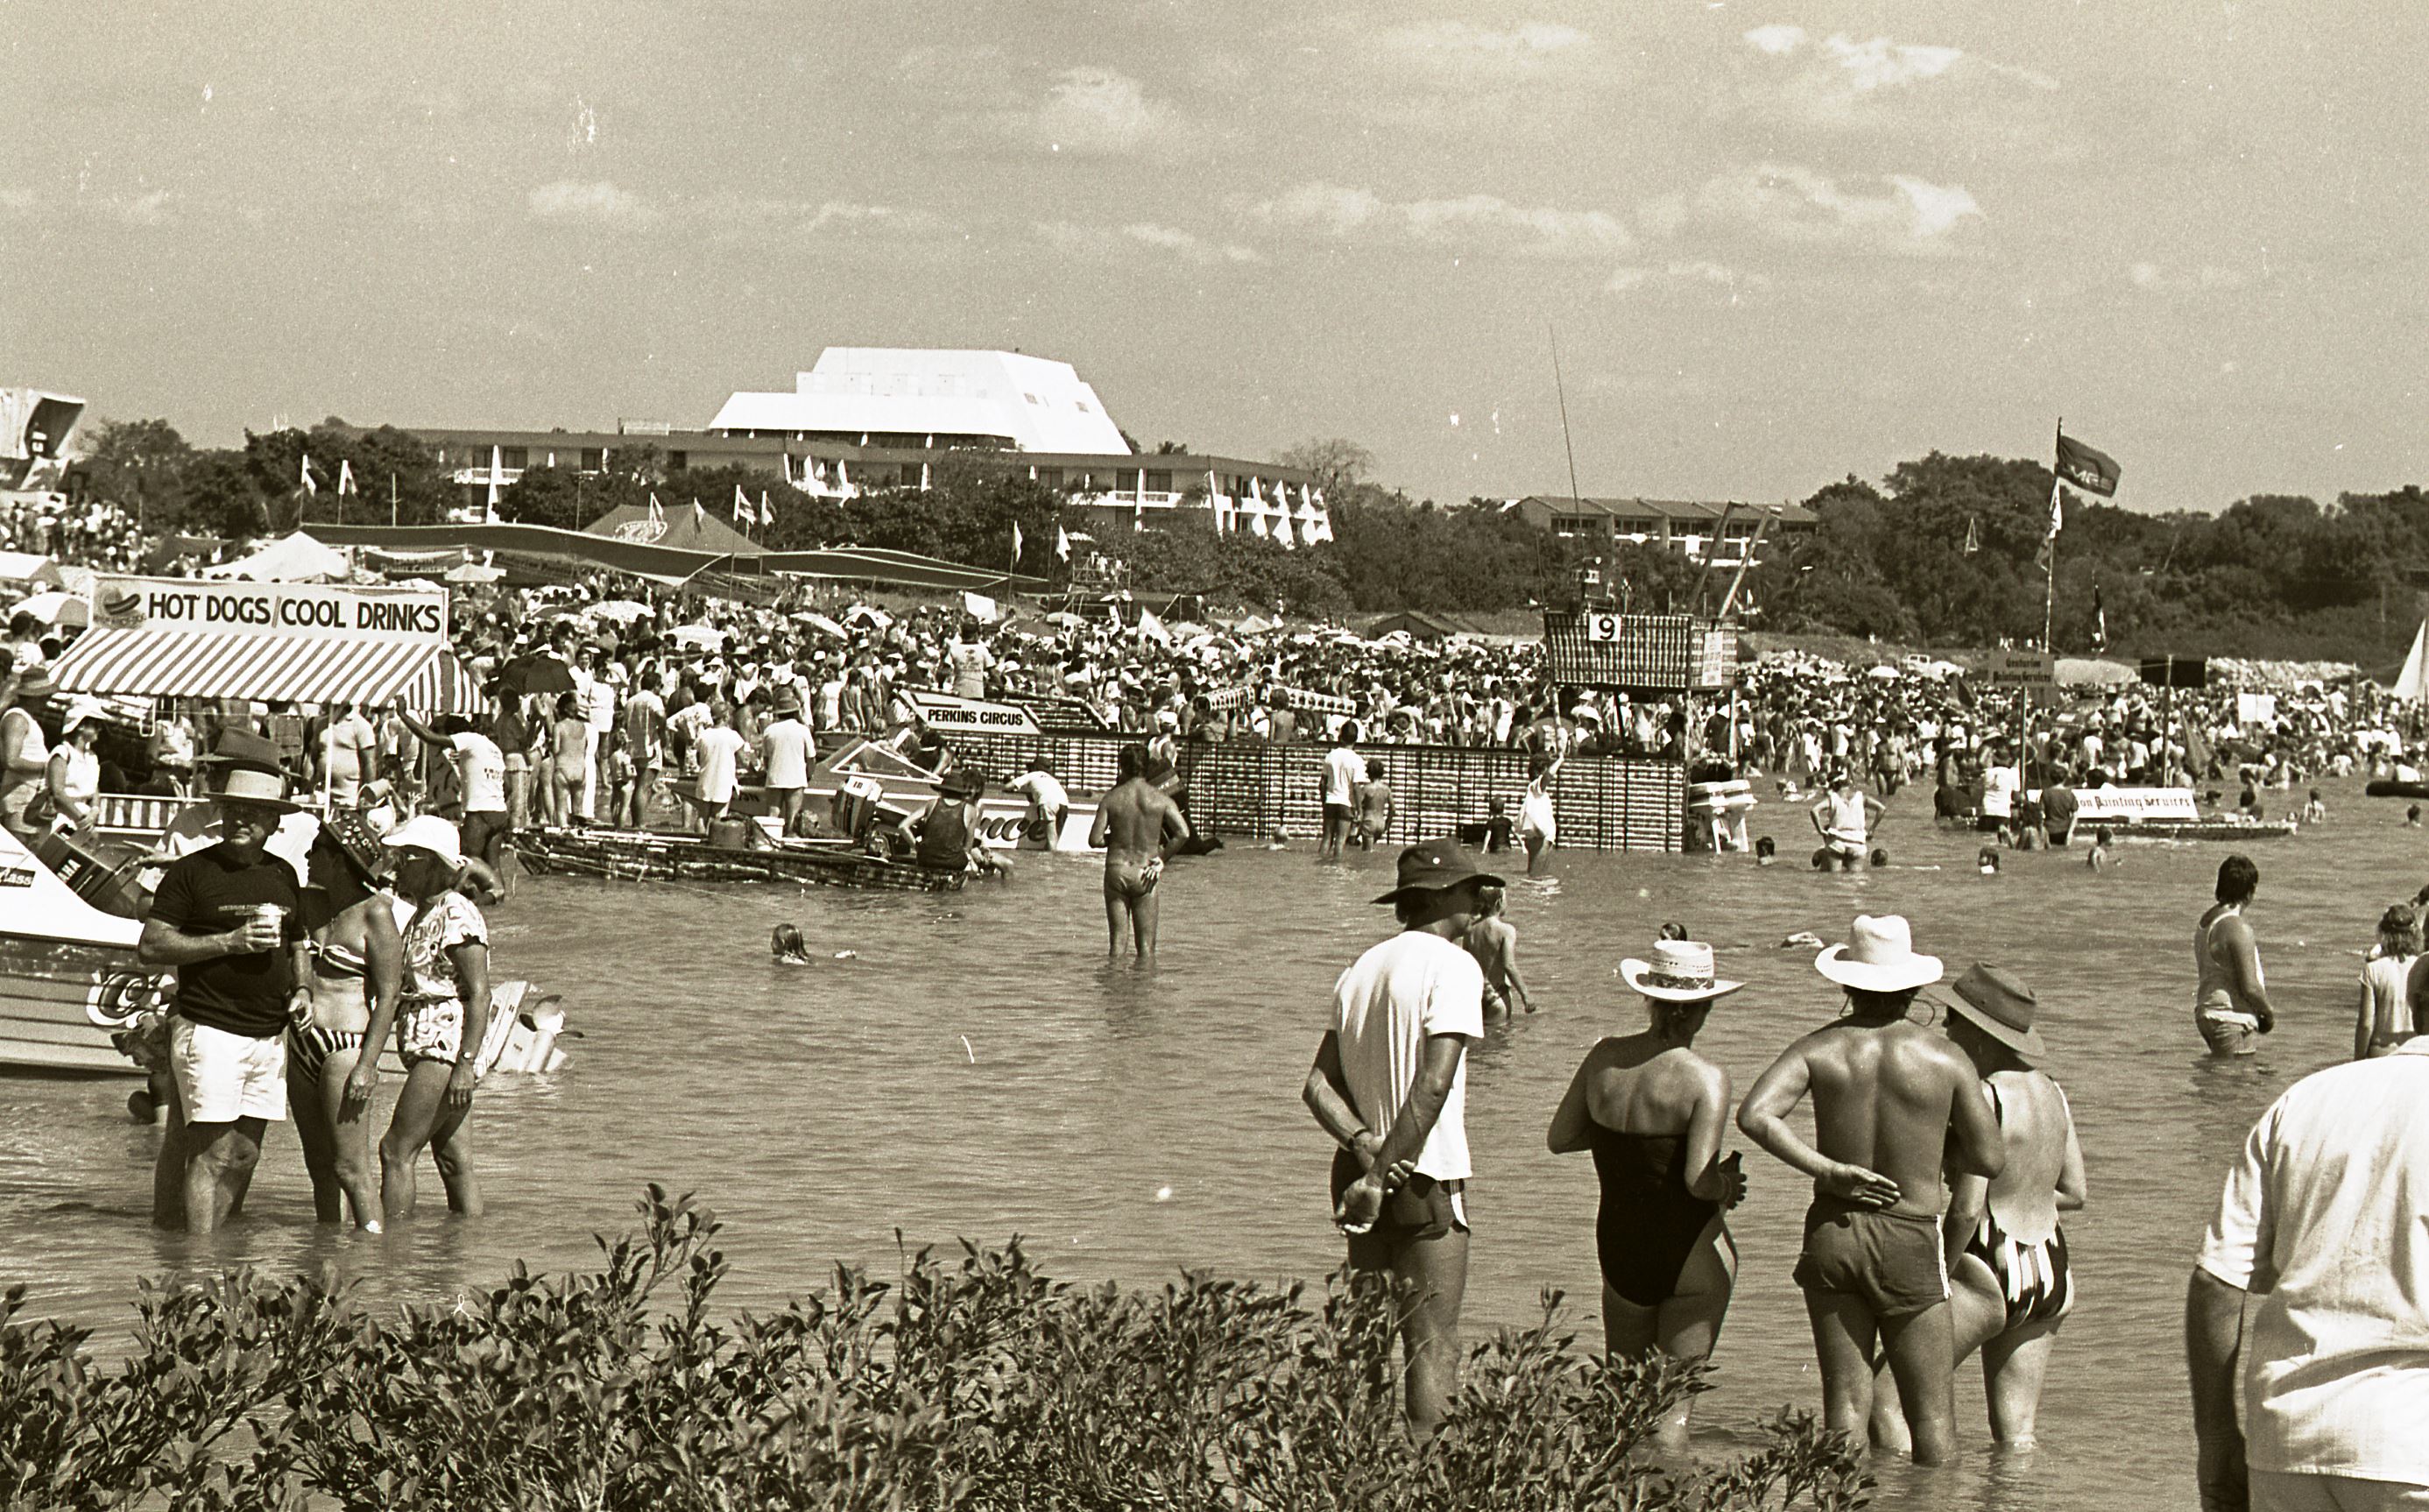 [Beer Can Regatta, 7 June 1987] <br />Image courtesy of Northern Territory Archives Service, Department of Chief Minister, NTRS 3823, Item BW2637, 5.